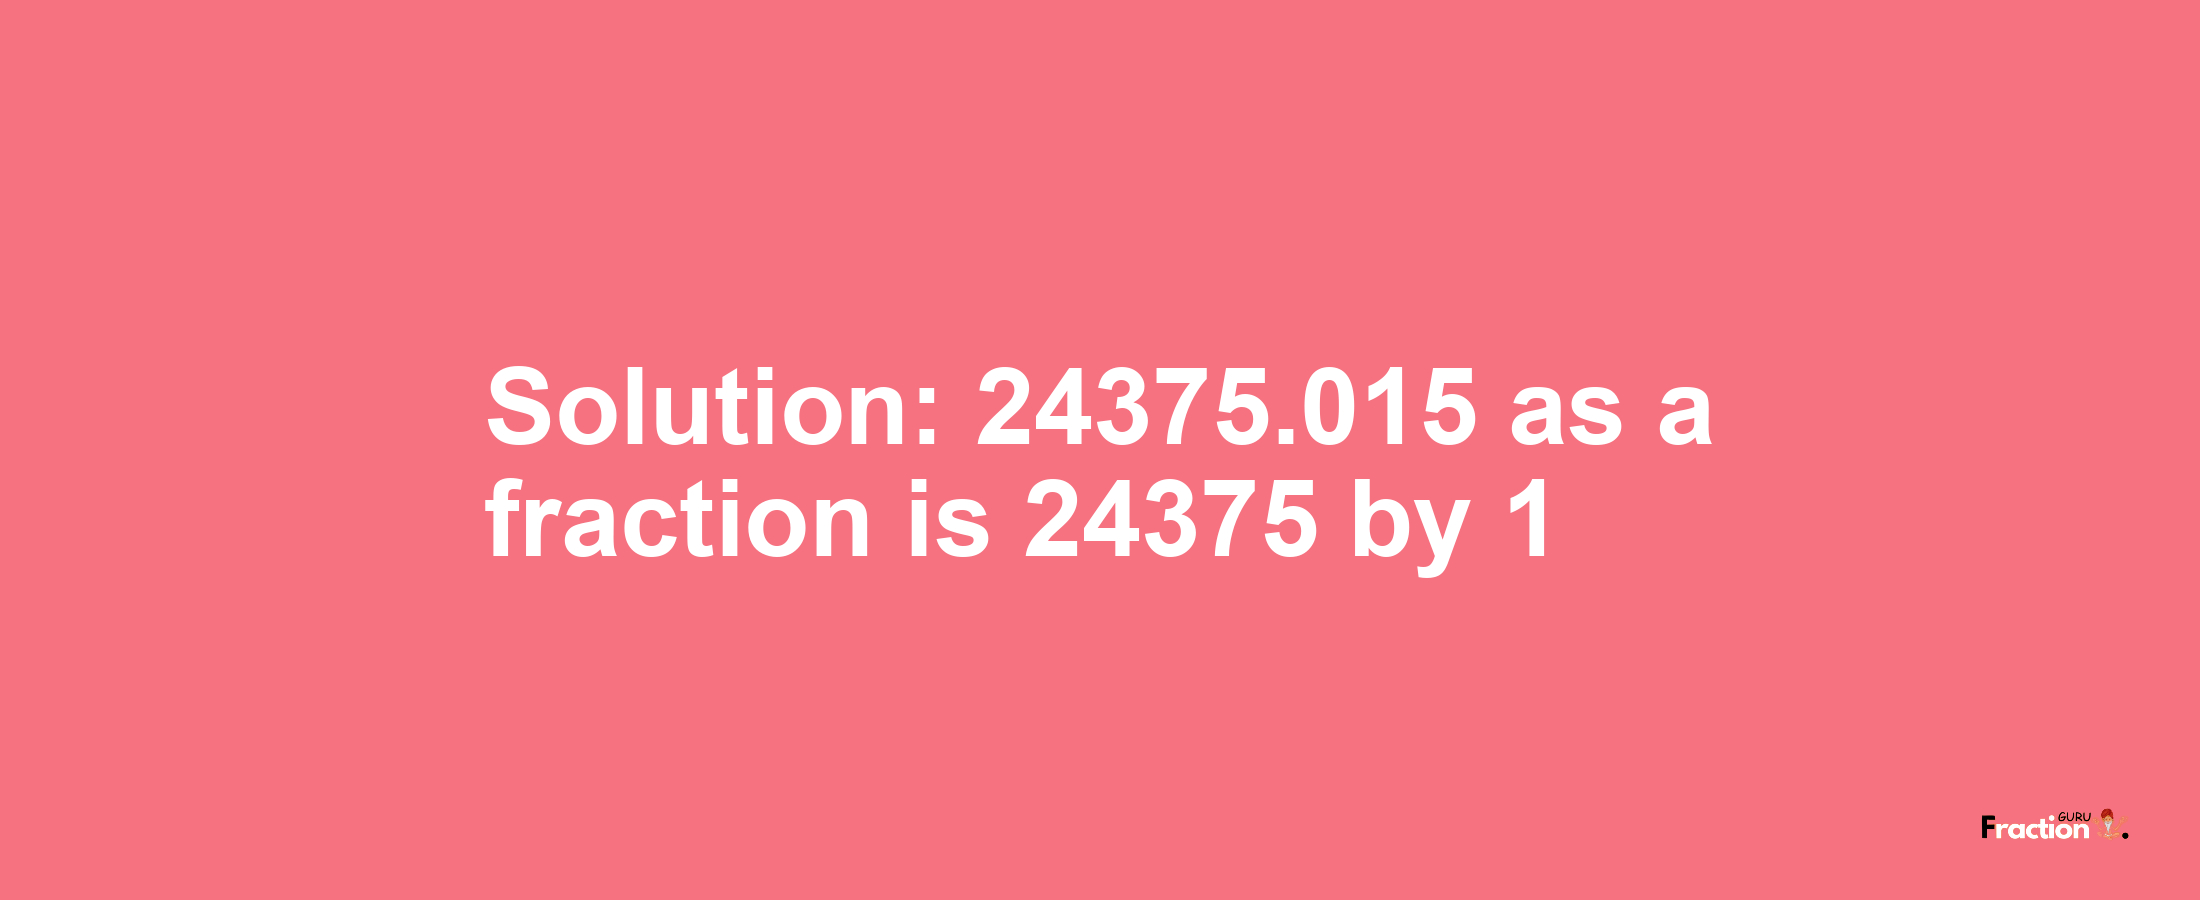 Solution:24375.015 as a fraction is 24375/1